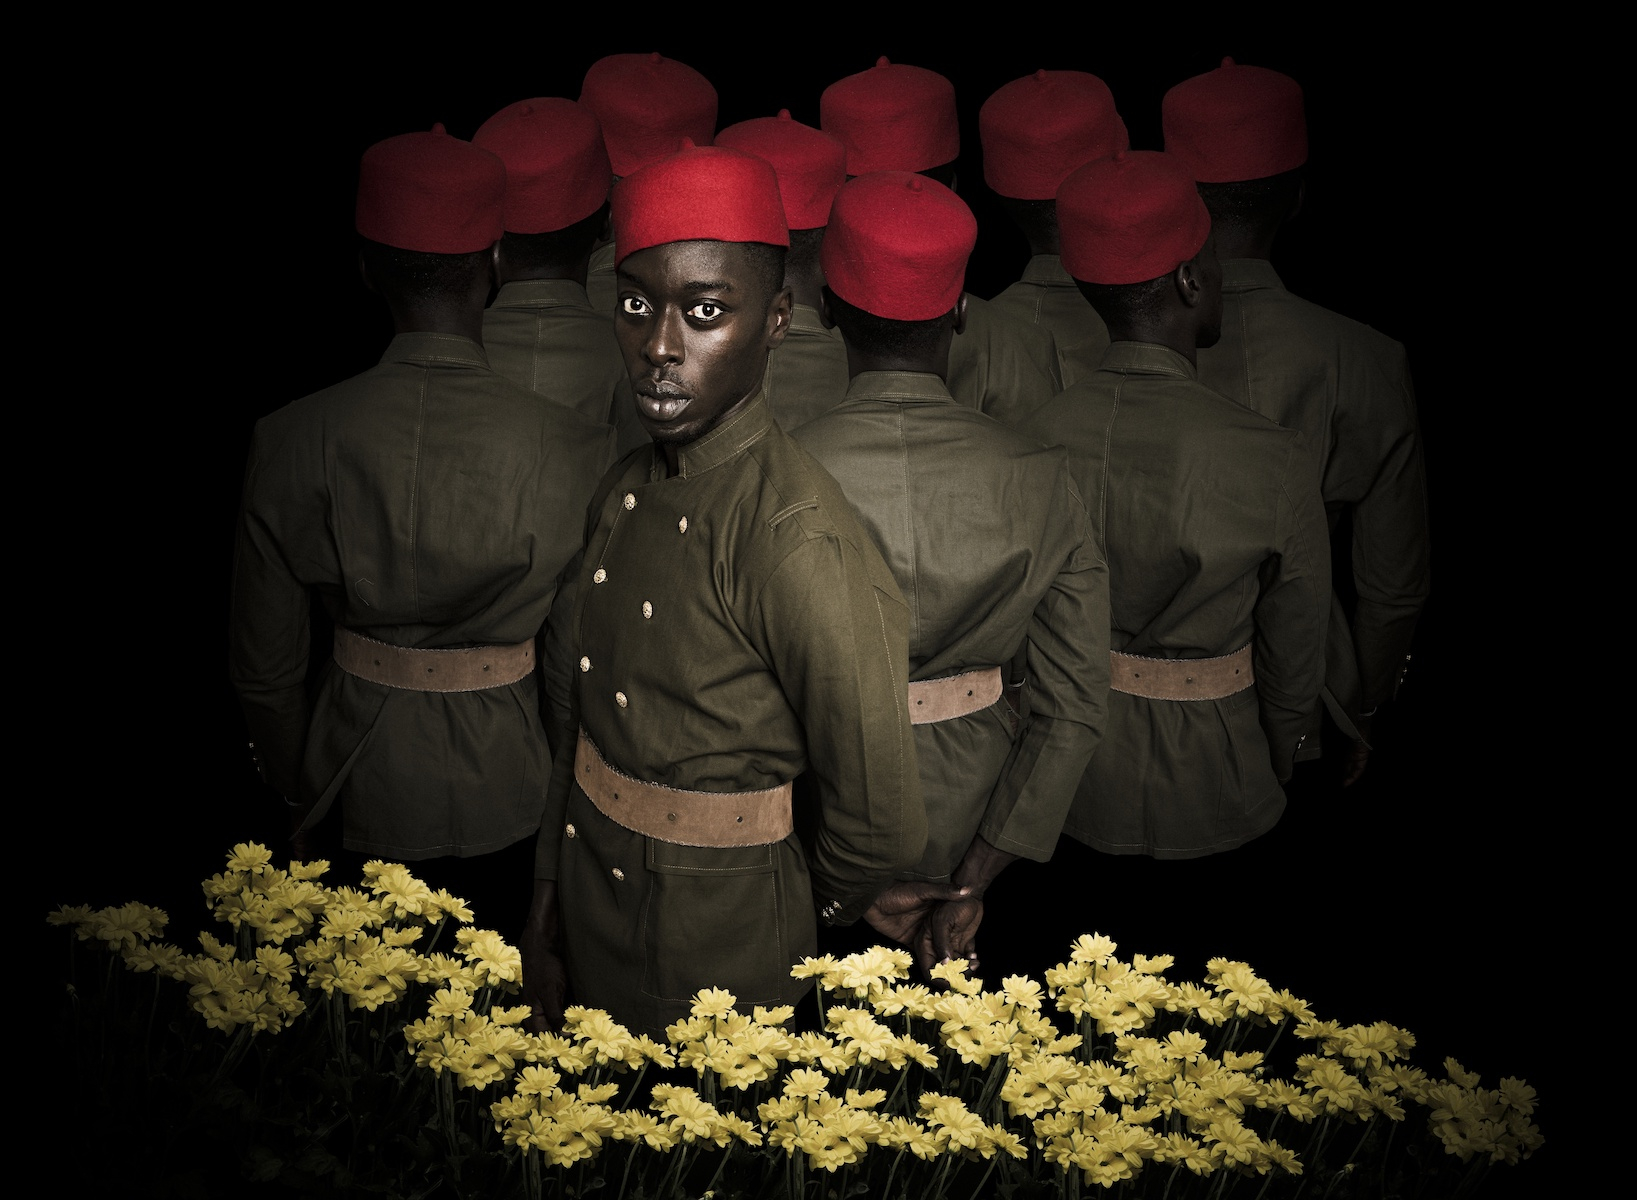  Photo: Omar Victor Diop, 'Thiaroye 1944', from Liberty (2016) (Credit: Omar Victor Diop / MAGNIN-A)